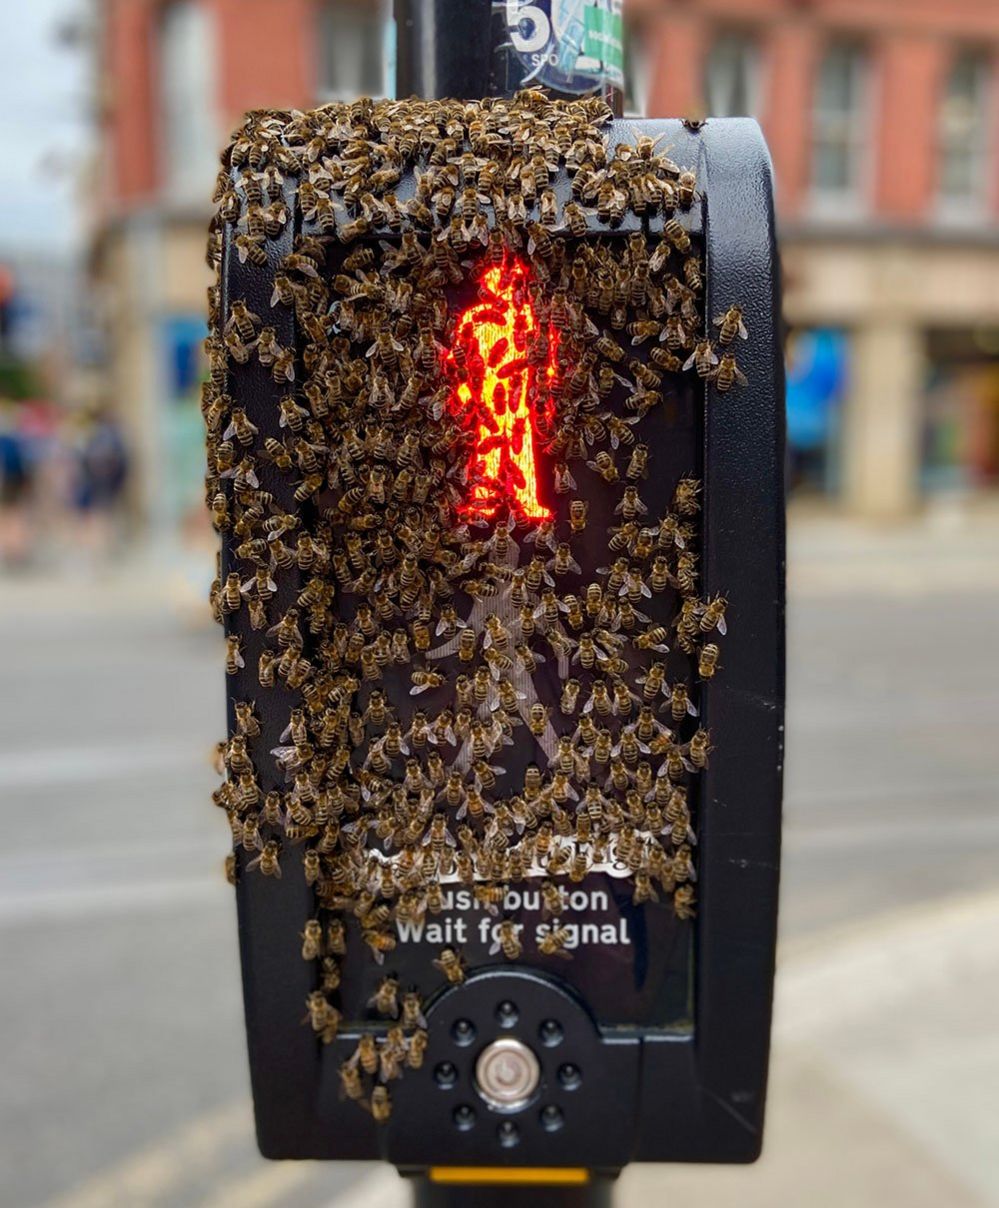 Bees on a traffic crossing system